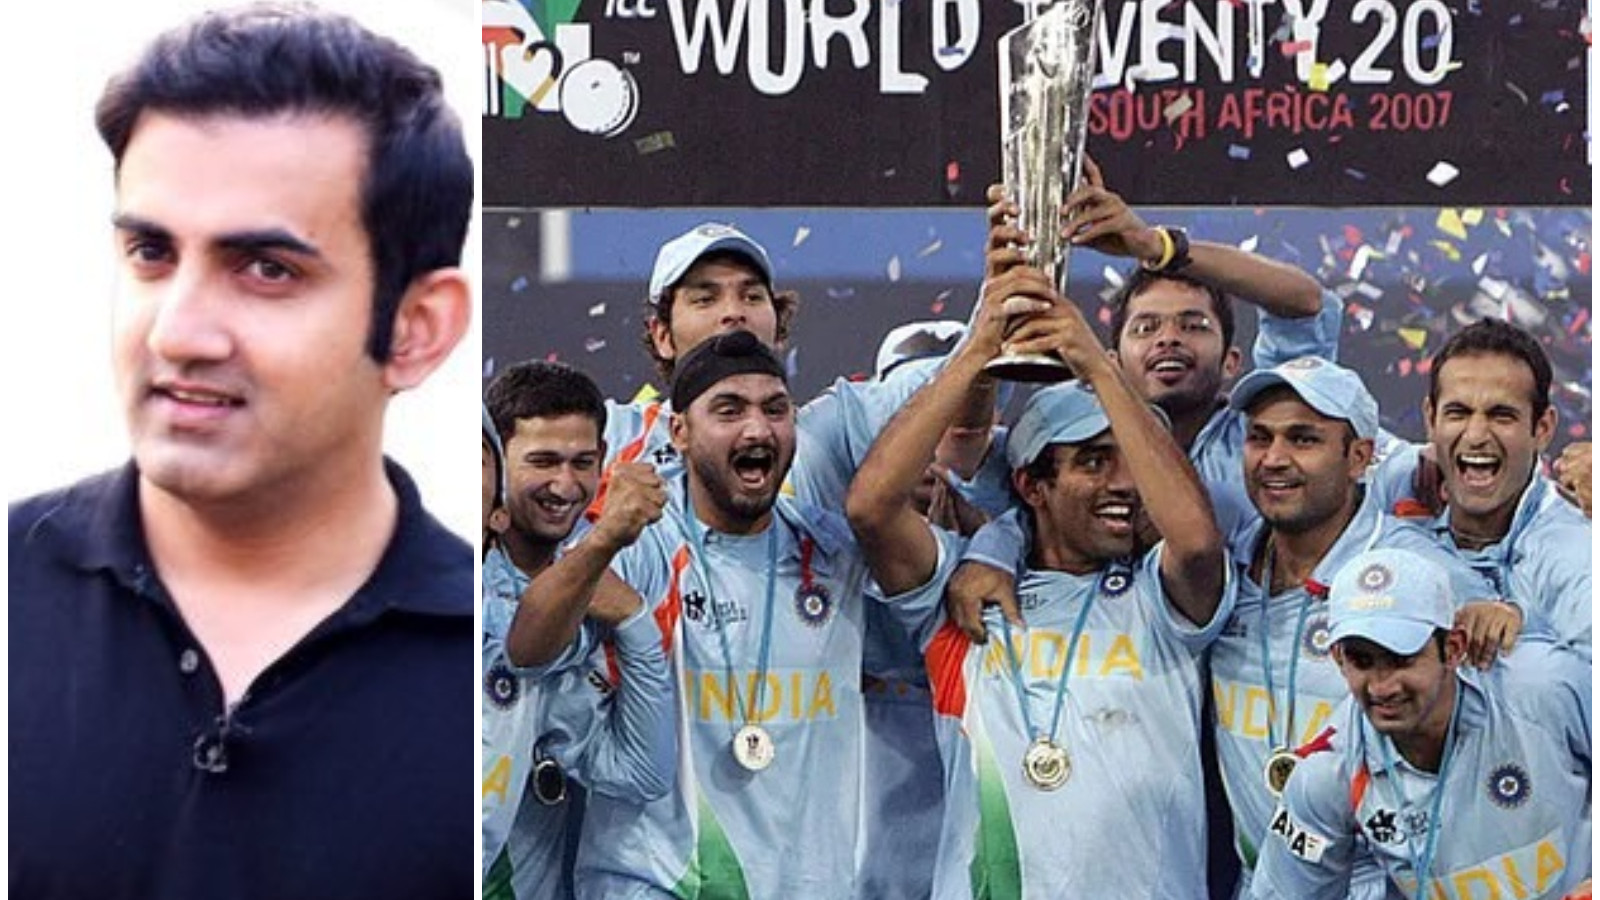 India needs to move on from their T20 World Cup win in 2007, says Gautam Gambhir